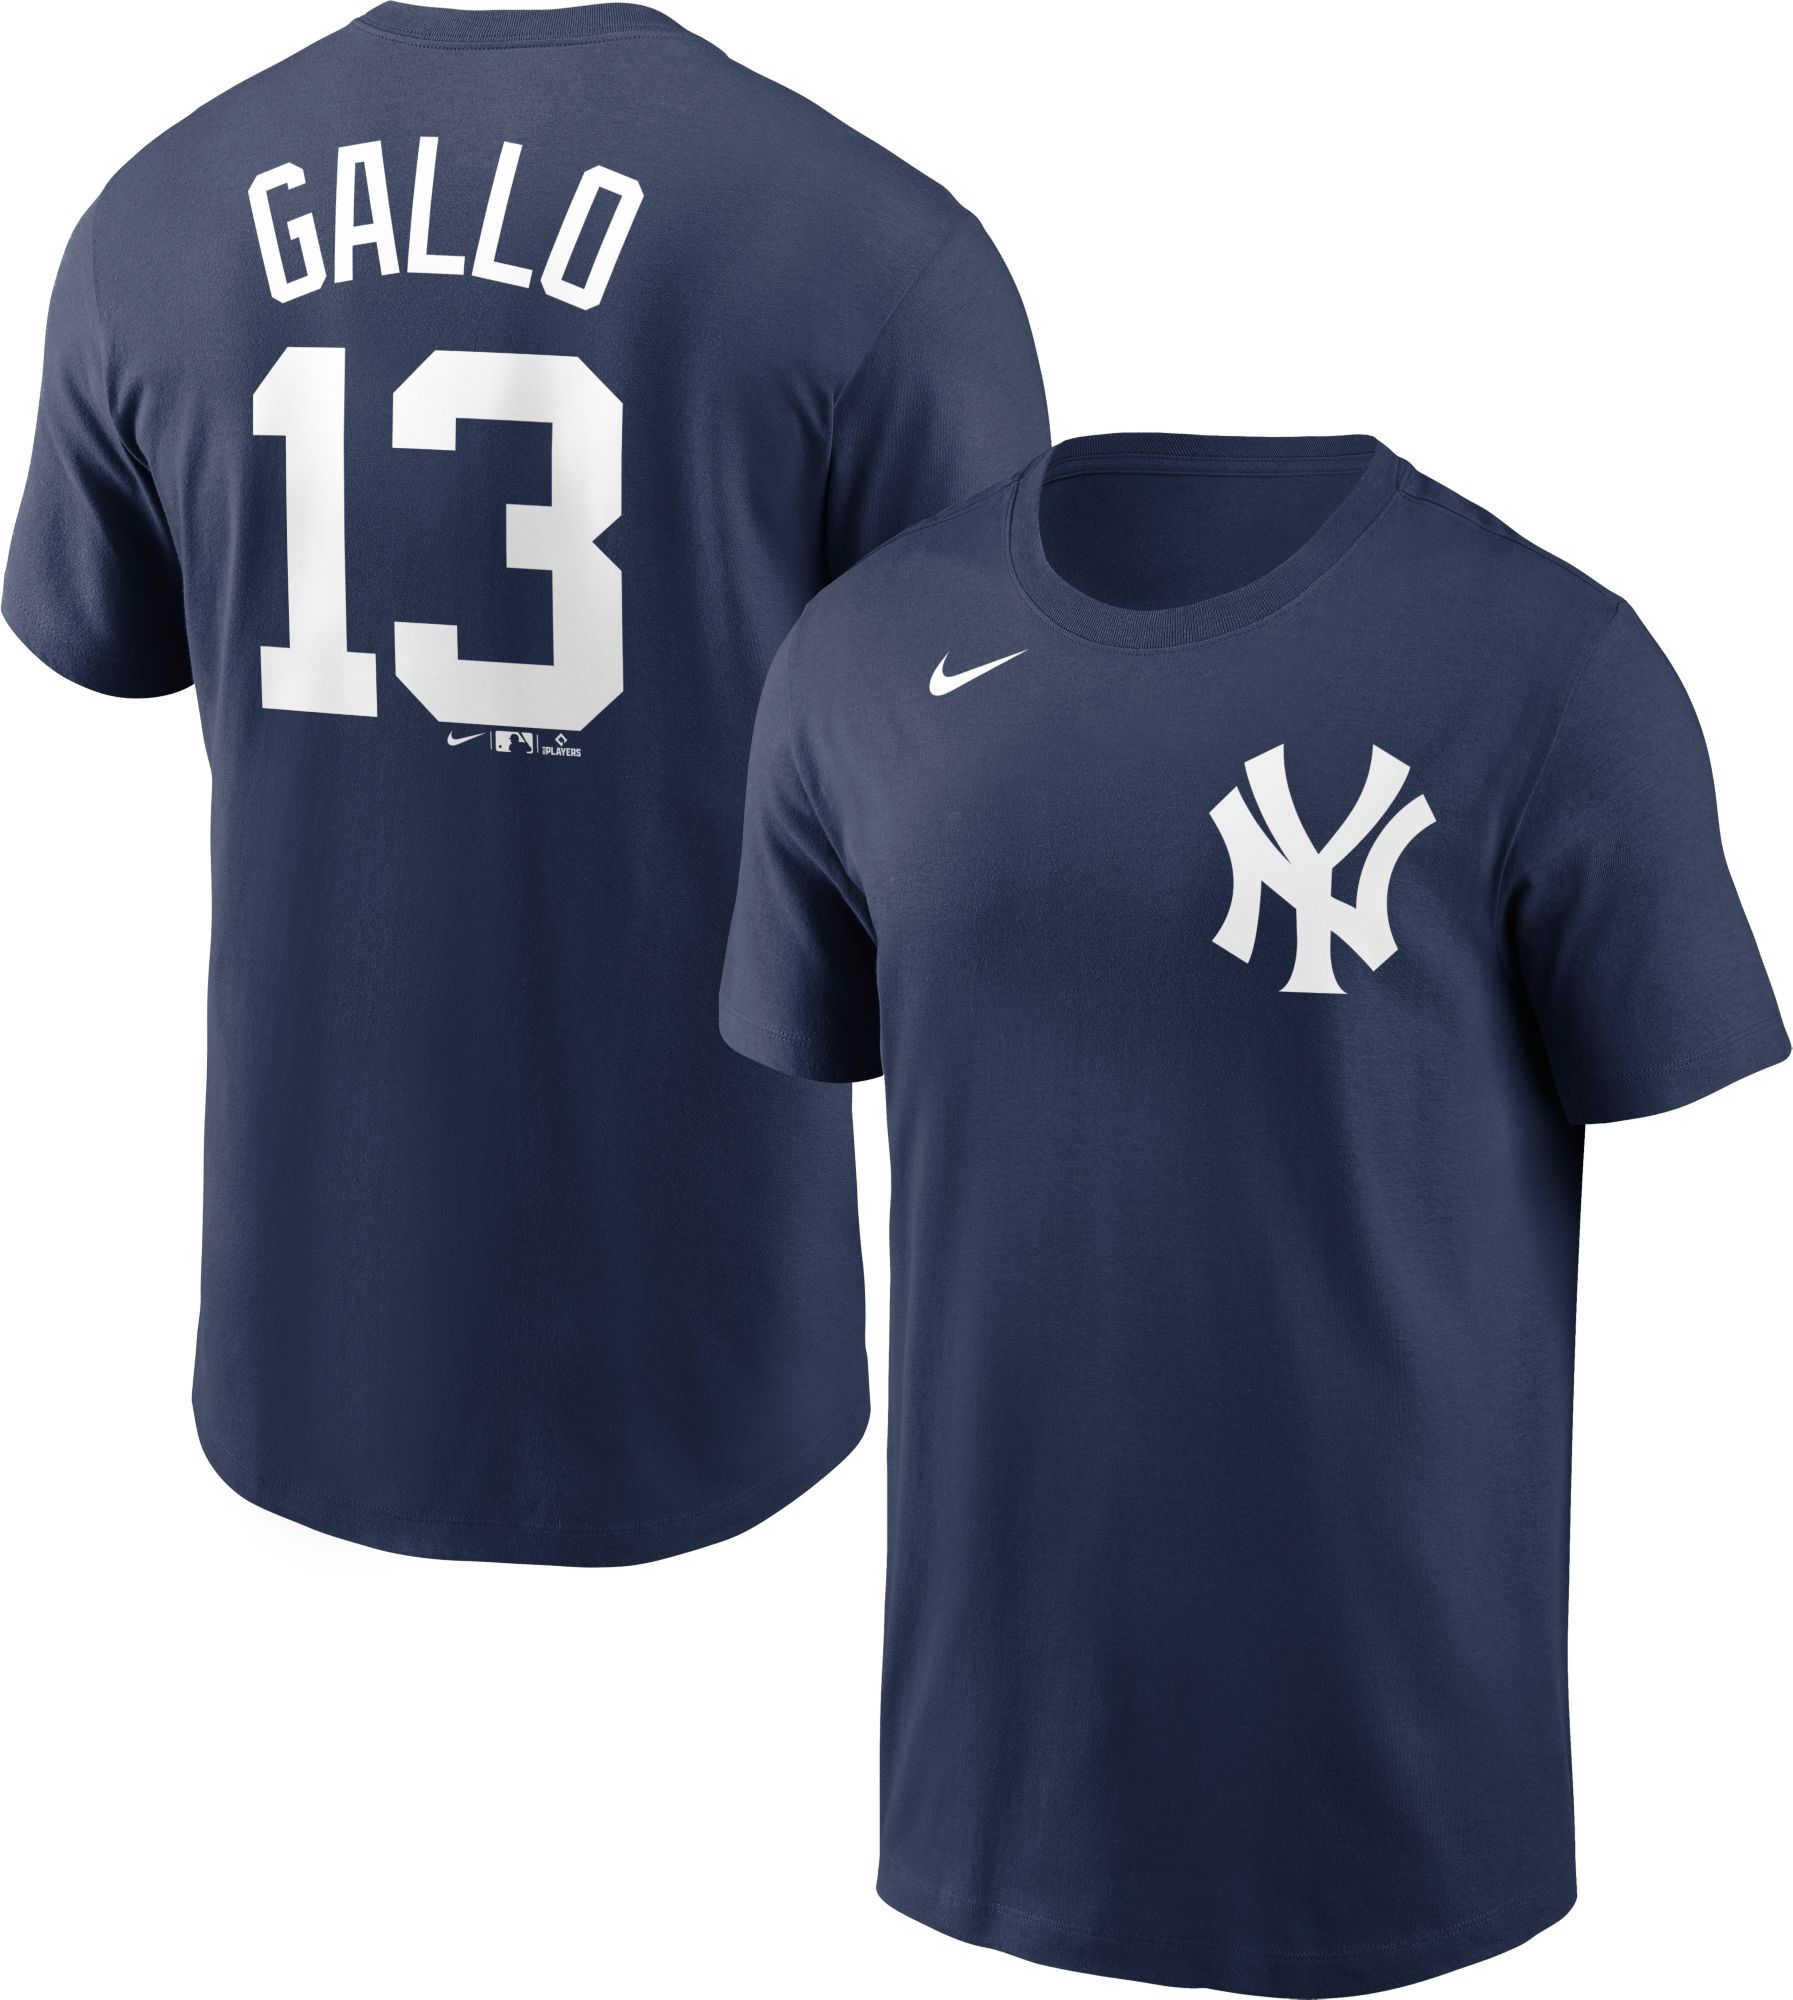 yankees jersey number 13